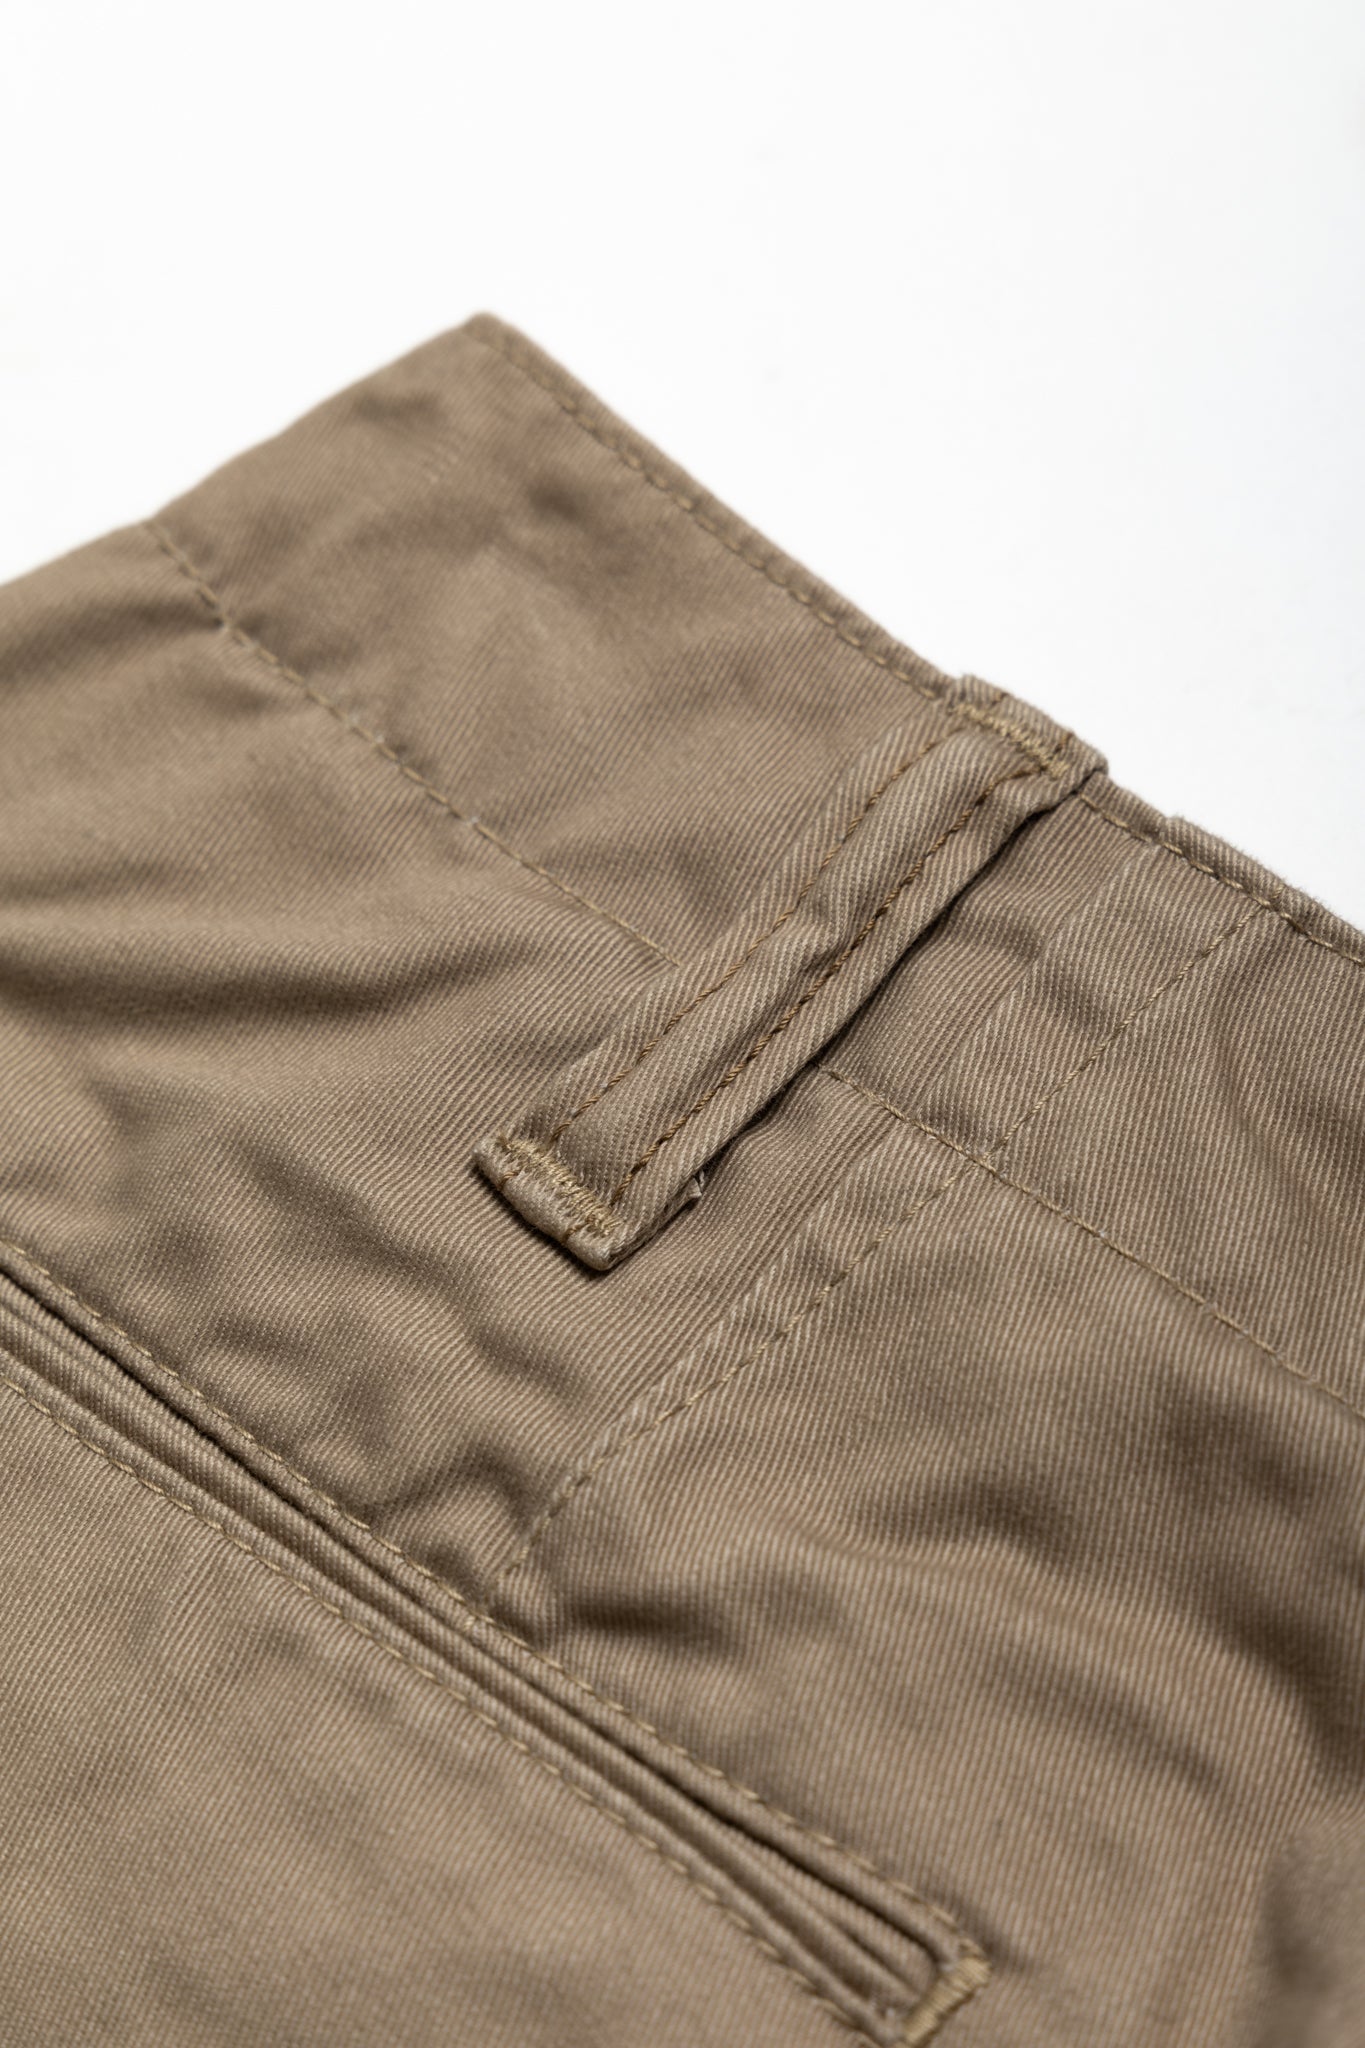 Worker's Chino High Density Twill Trousers - Beige